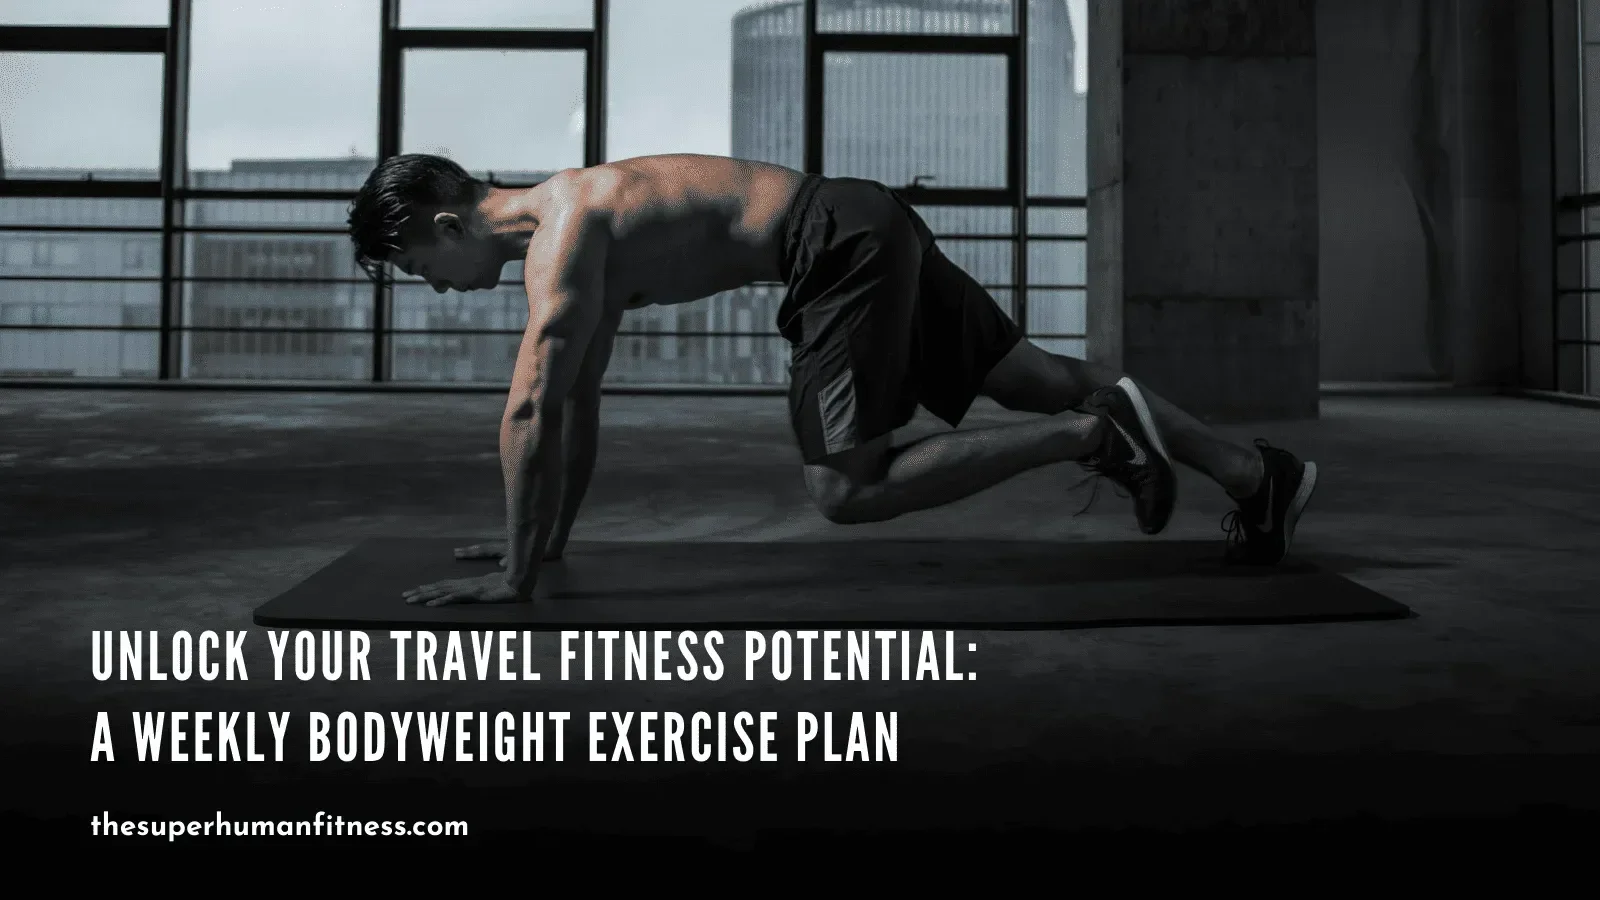 A Weekly Bodyweight Exercise Plan